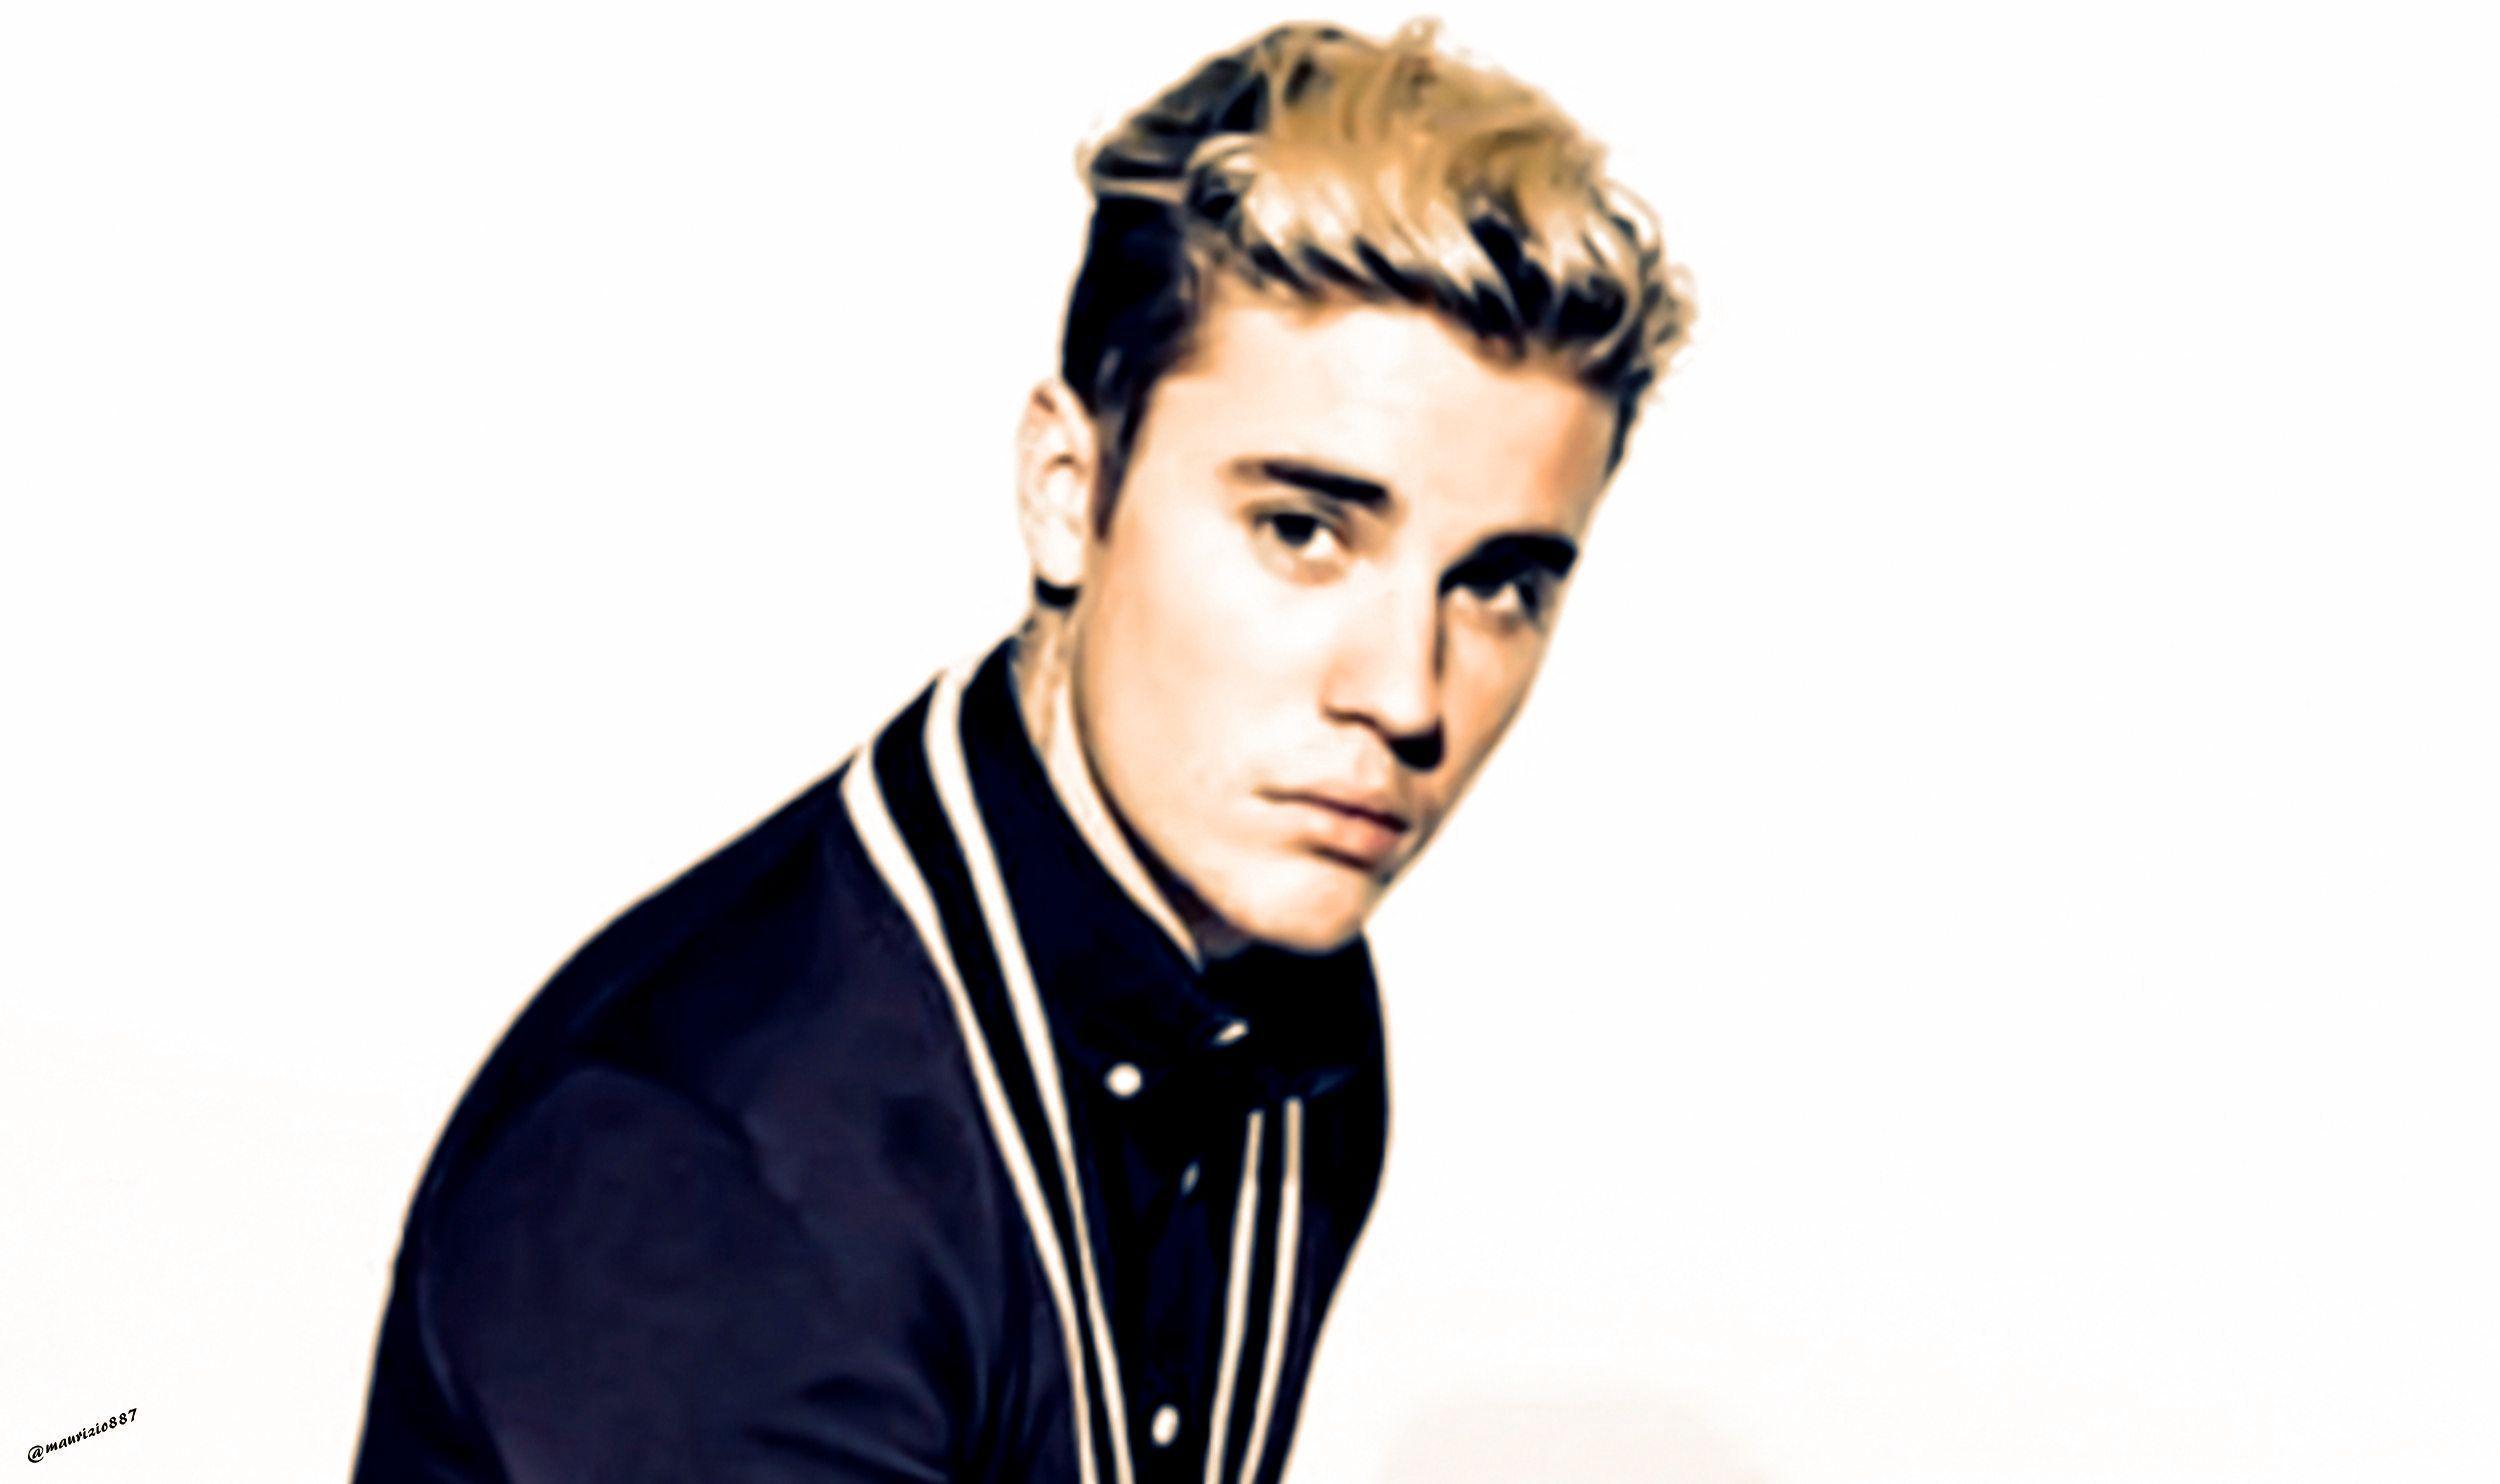 Justin Bieber Image Search Results. Posters